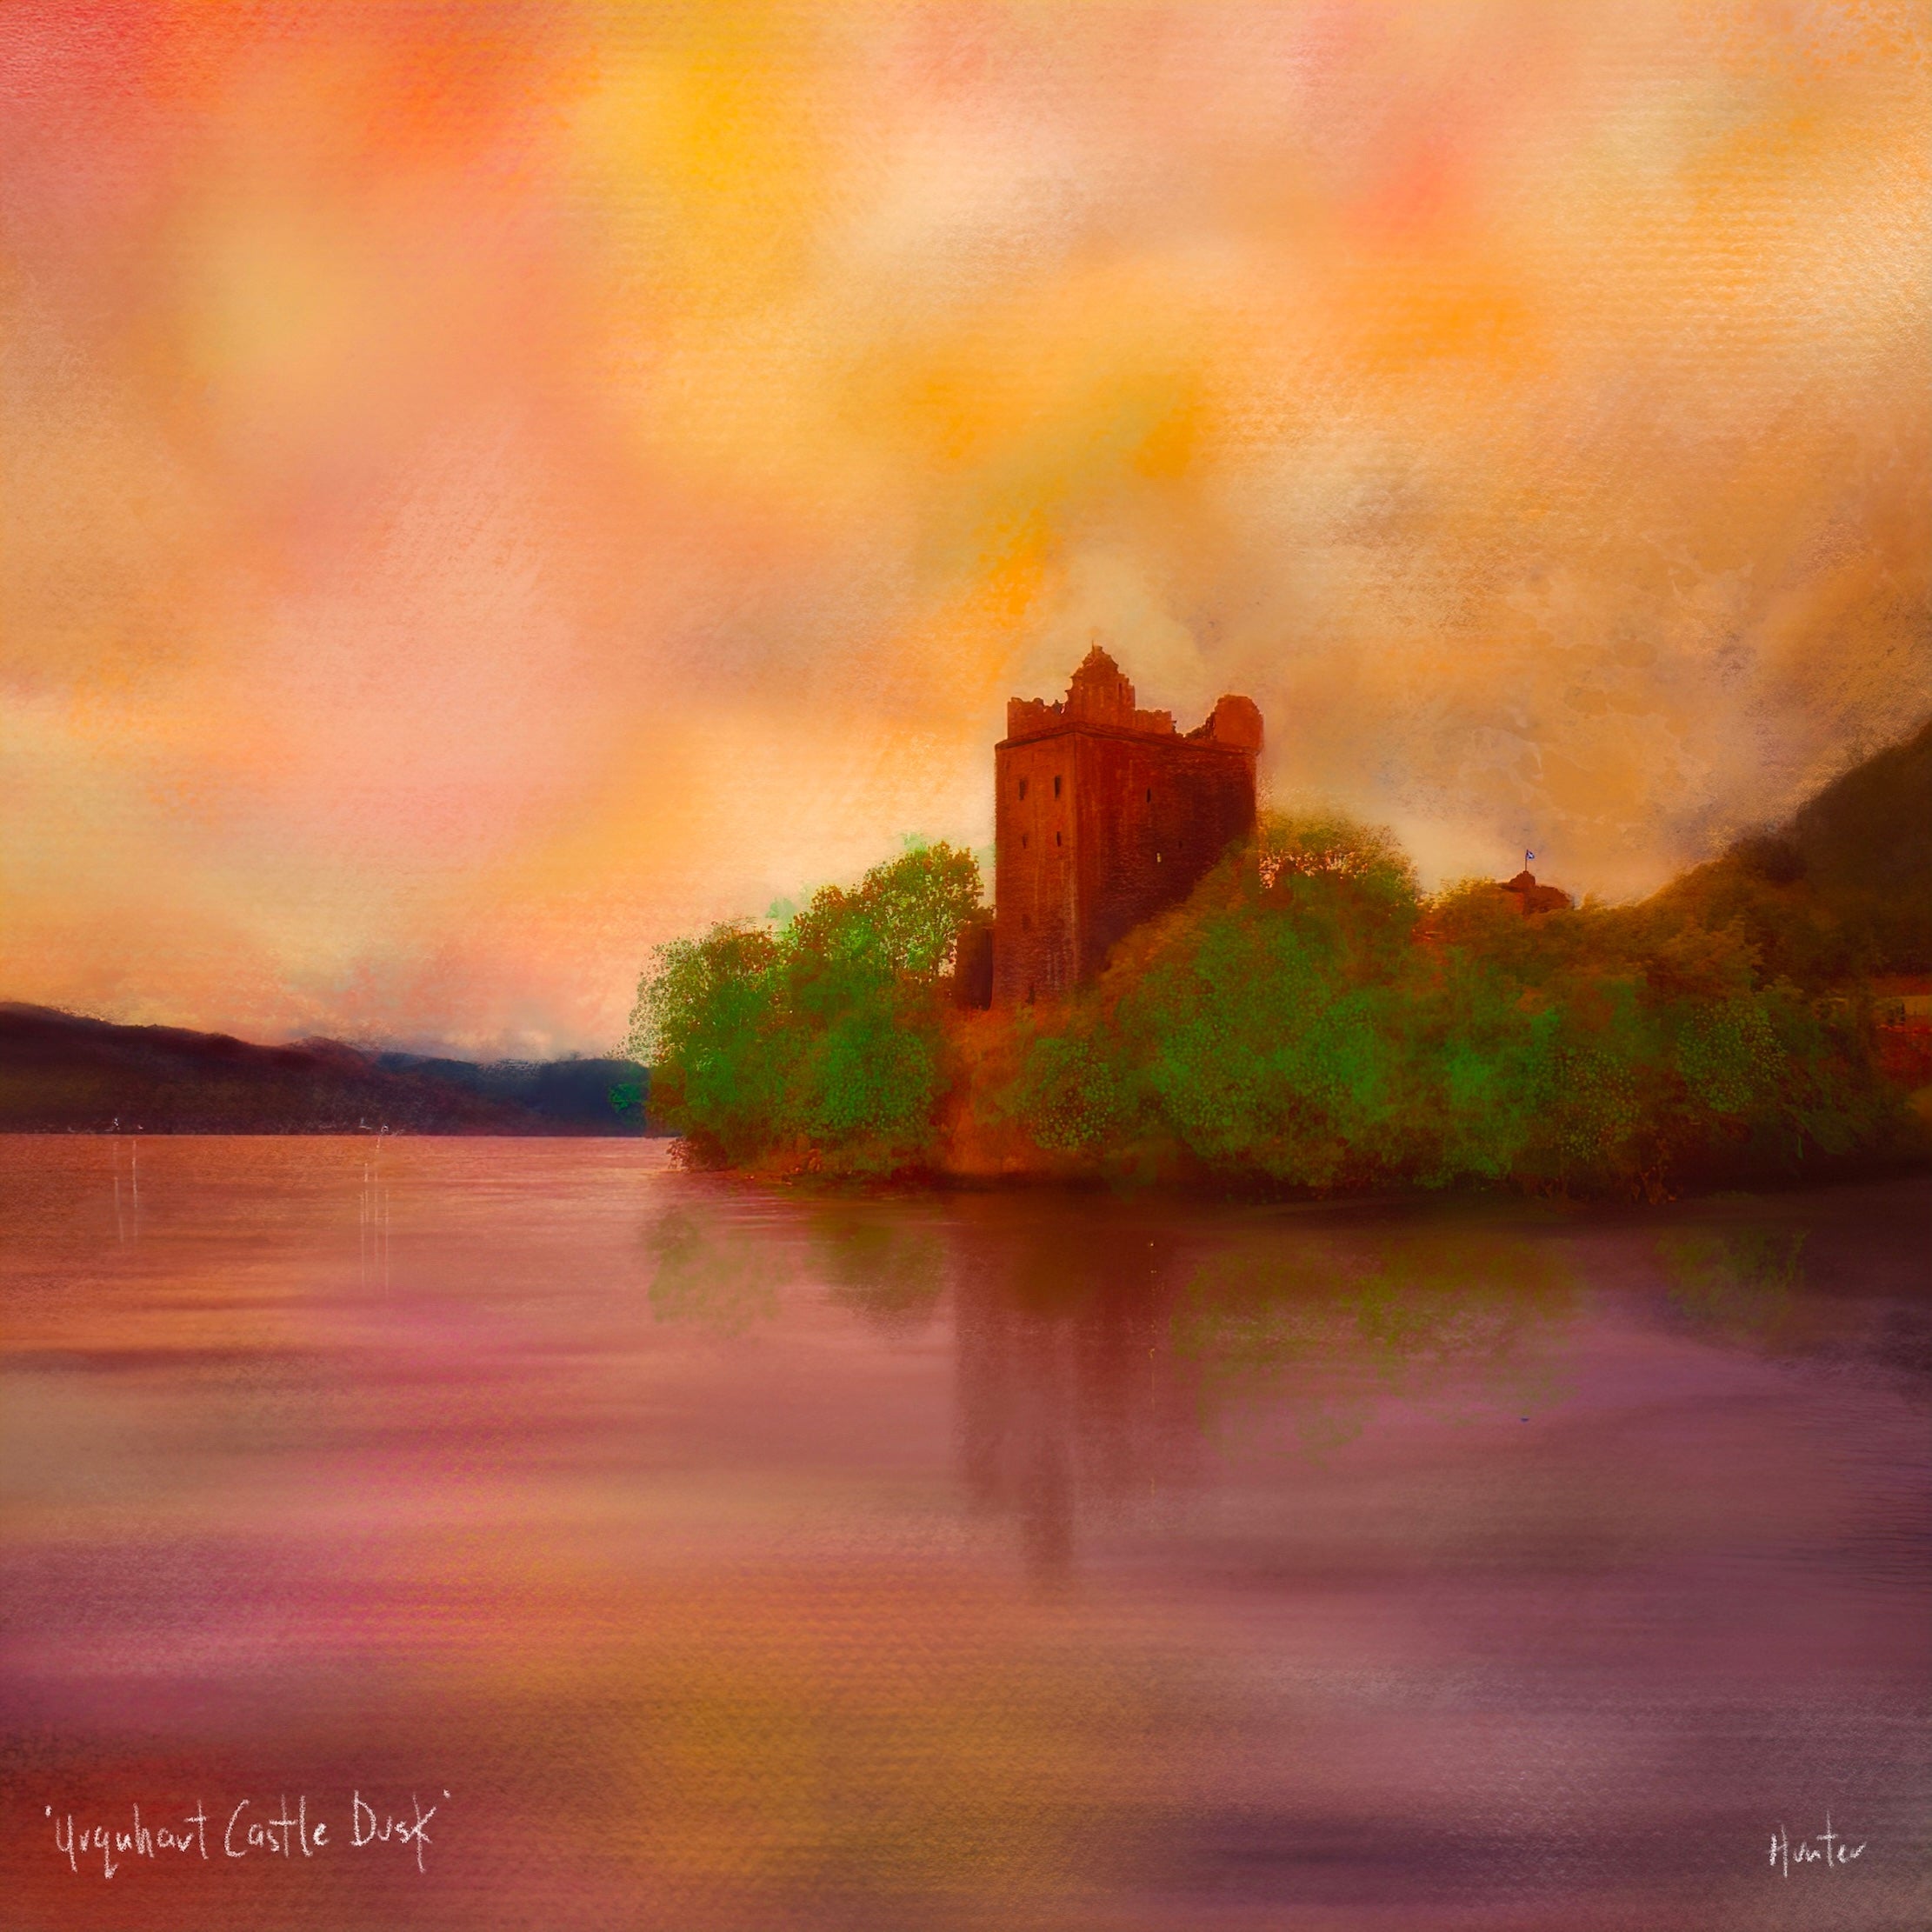 Urquhart Castle Dusk | Scotland In Your Pocket Art Print-Scotland In Your Pocket Framed Prints-Historic & Iconic Scotland Art Gallery-Paintings, Prints, Homeware, Art Gifts From Scotland By Scottish Artist Kevin Hunter